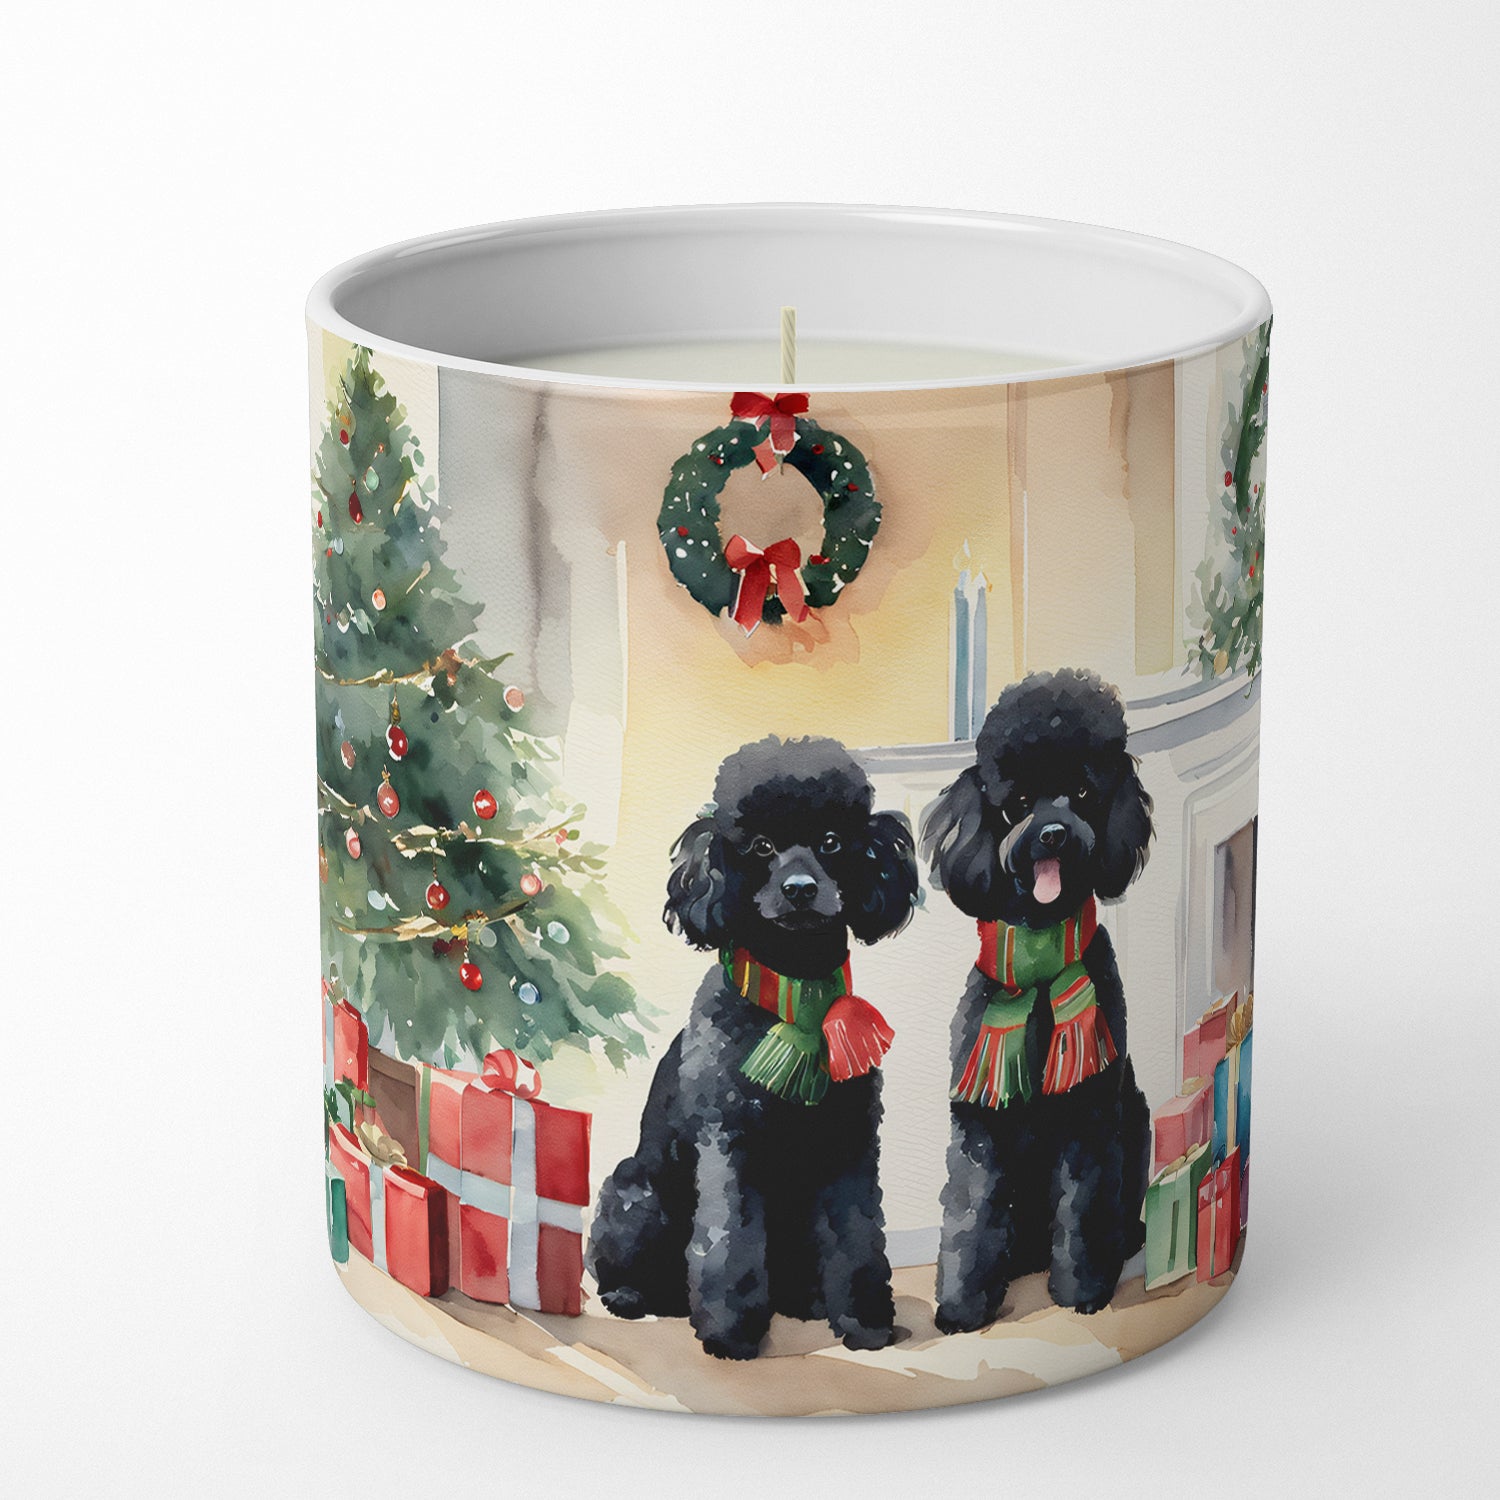 Buy this Poodle Cozy Christmas Decorative Soy Candle